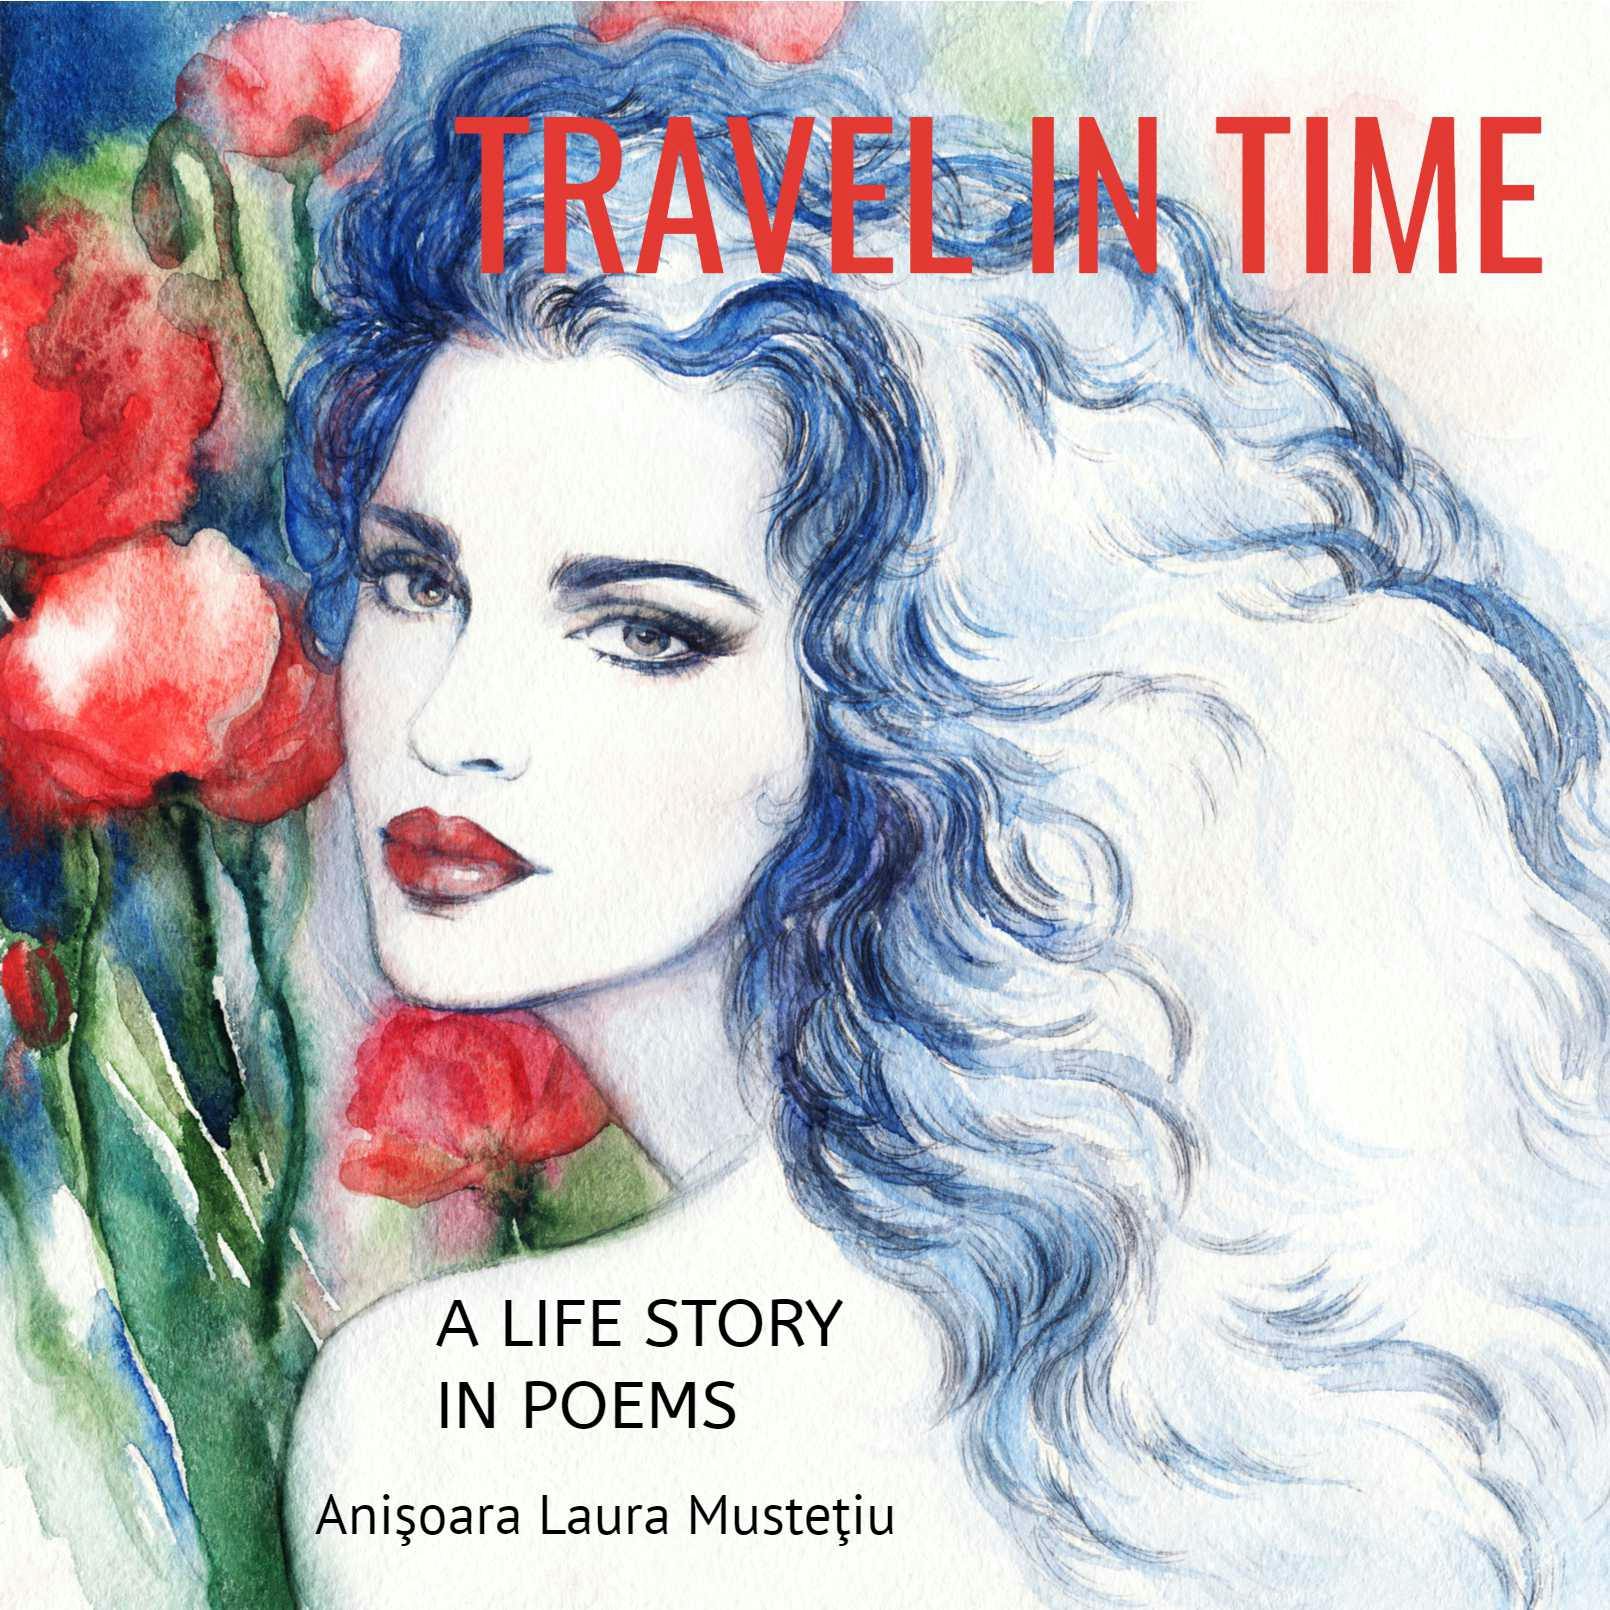 TRAVEL IN TIME: A LIFE STORY IN POEMS - Anisoara Laura Mustetiu